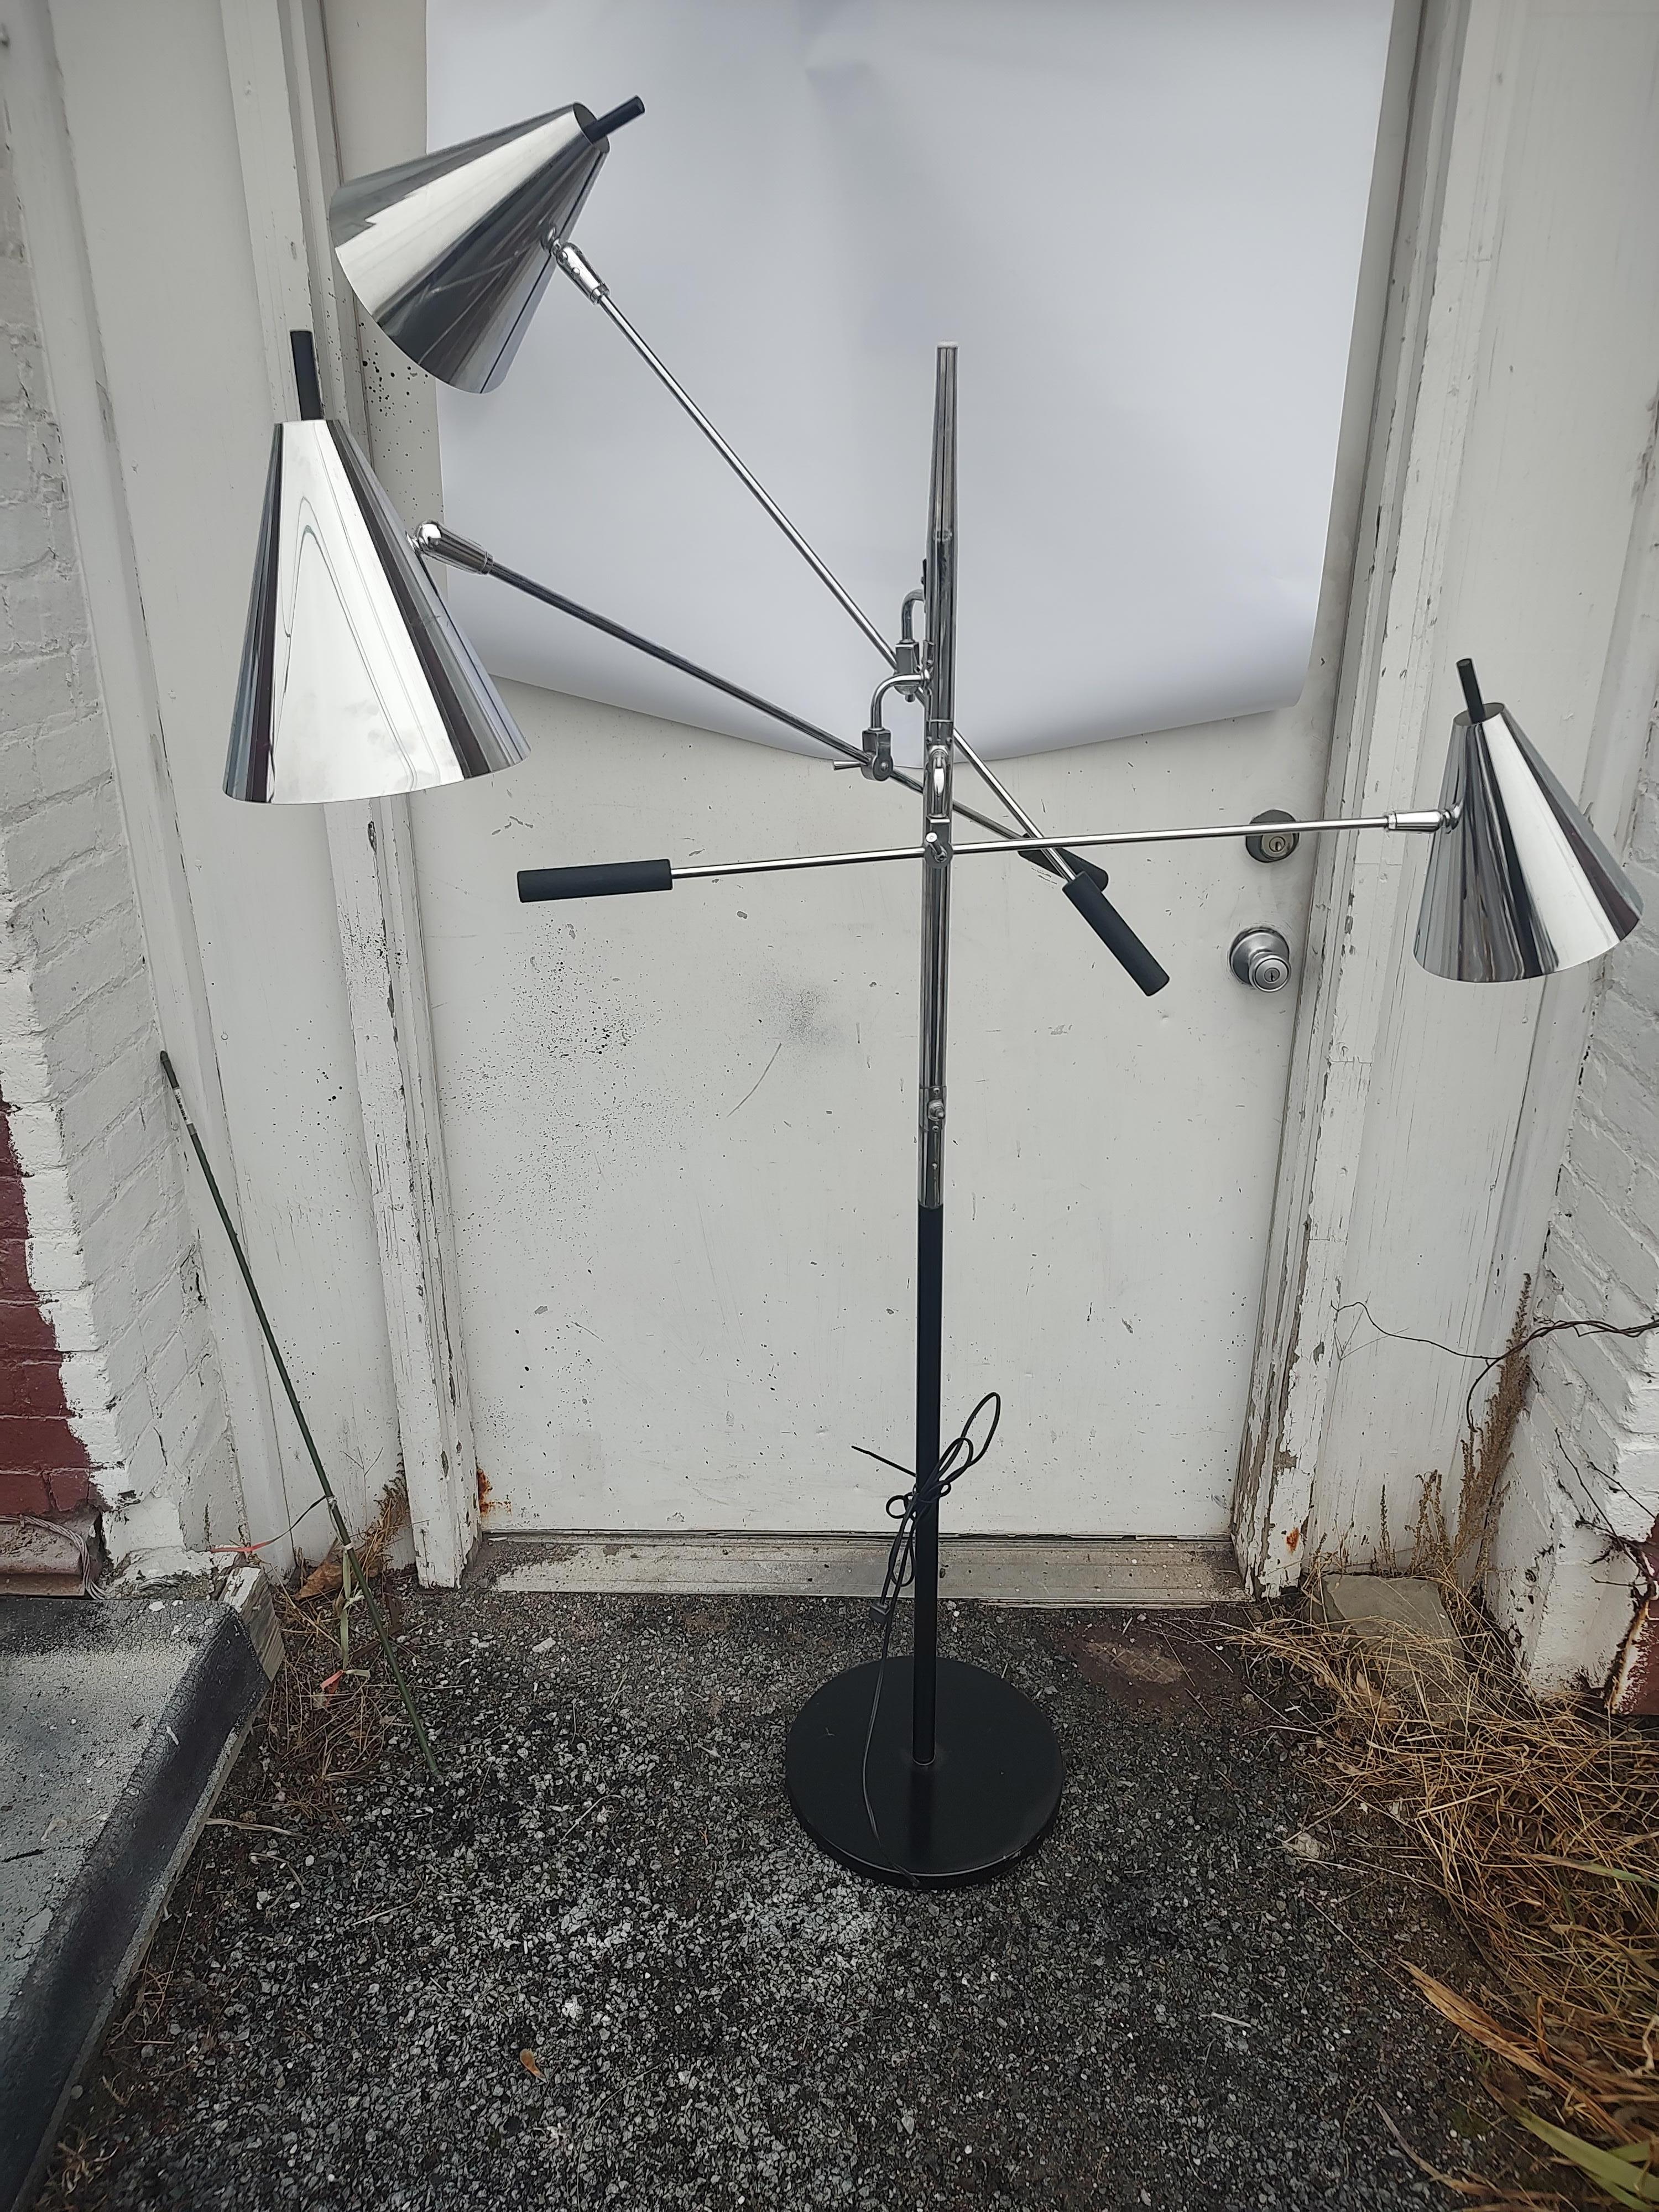 Spectacular period mid century modern design of a triennial lamp in nickel plated chrome with a heavy weighted black base and accents. Attributed to  Gino Sarfatti lighting designer who has created many iconic lamps. This particular piece is a real